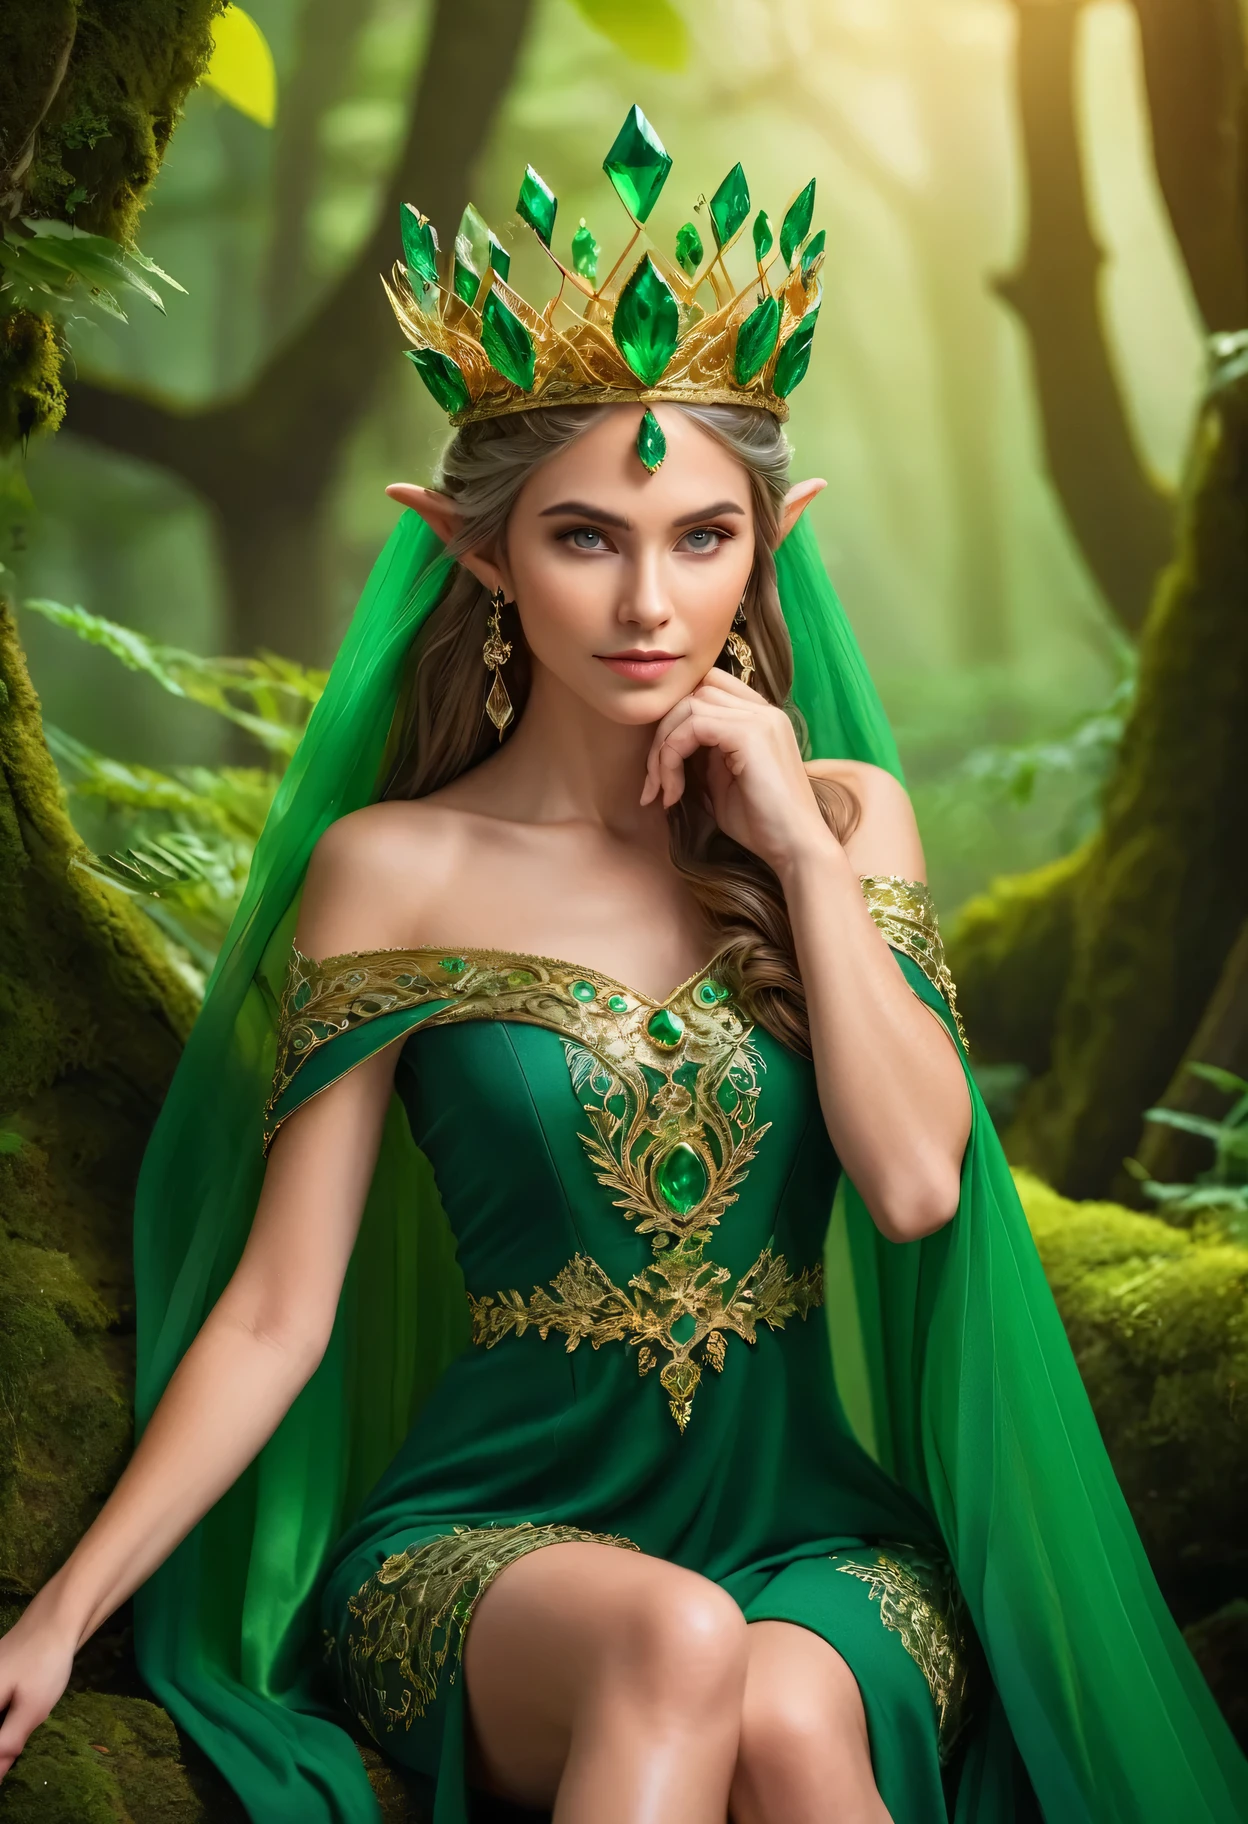 ProFessional photography For an elite magazine, the ElF Queen in chic Forest elF clothes with intricate green paintings, a magniFicent dress, on her head an elegant crown oF intricate interweaving oF golden threads, the ElF Queen poses, in her hand a crystal crystal glowing green From inside, shod in soFt expensive boots, the ElF Queen looks at the viewer, Full pose, Full the body, a worthy pose oF a queen, zwinkert, Canon EOS R5 Kamera mit Canon RF Objektiv 100-500 mm F4.5-7.1L IS USM, 500 mm, 1/500 Sek.., F/7.1 und ISO 1000.